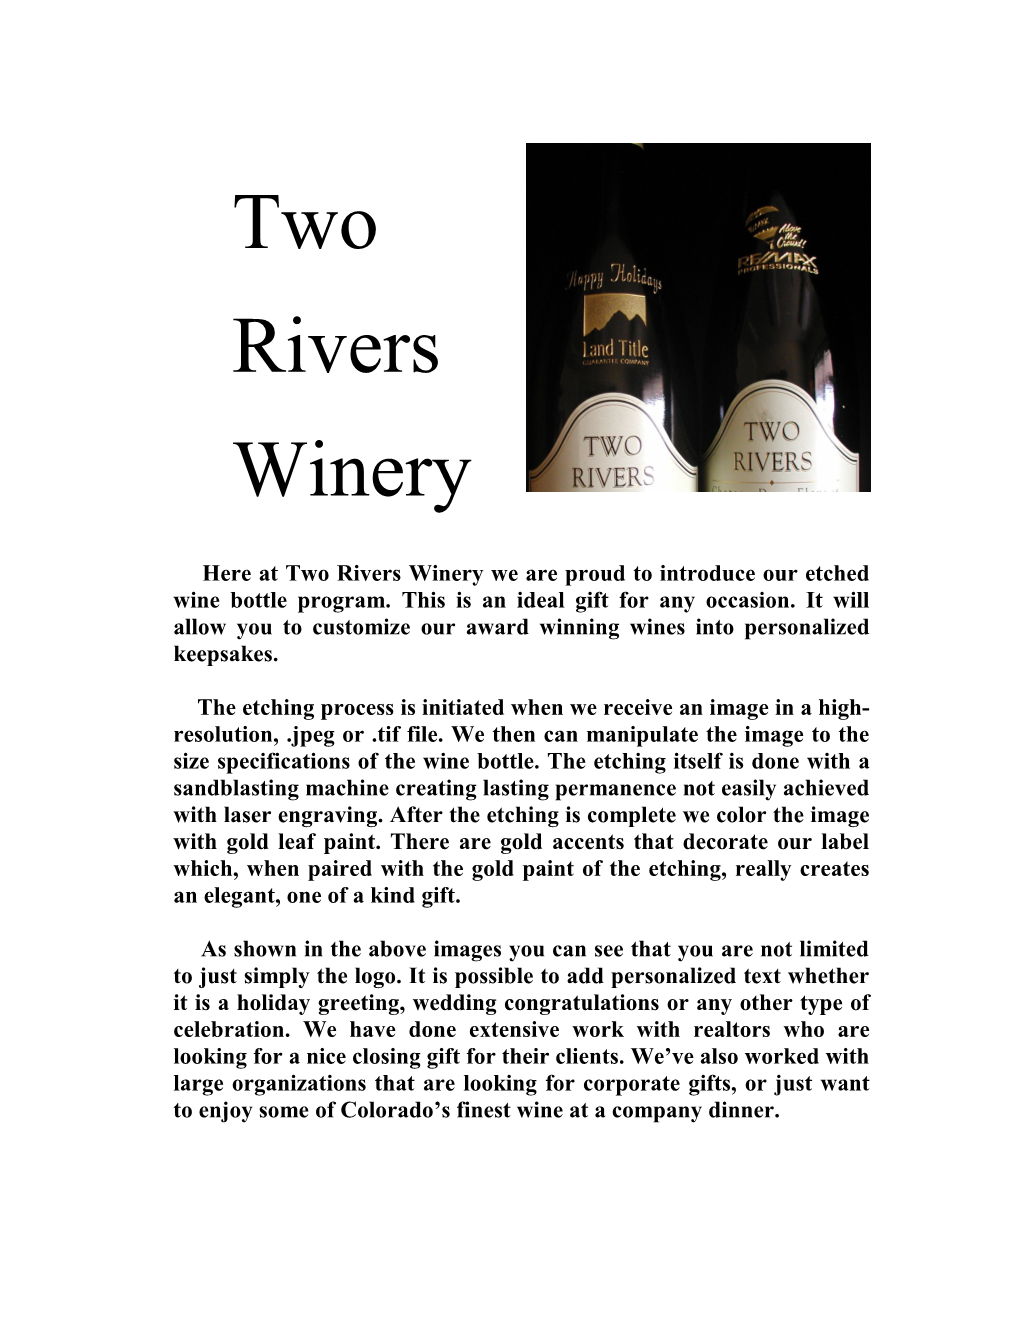 Here at Two Rivers Winery We Are Proud to Introduce Our Etched Wine Bottle Program. This